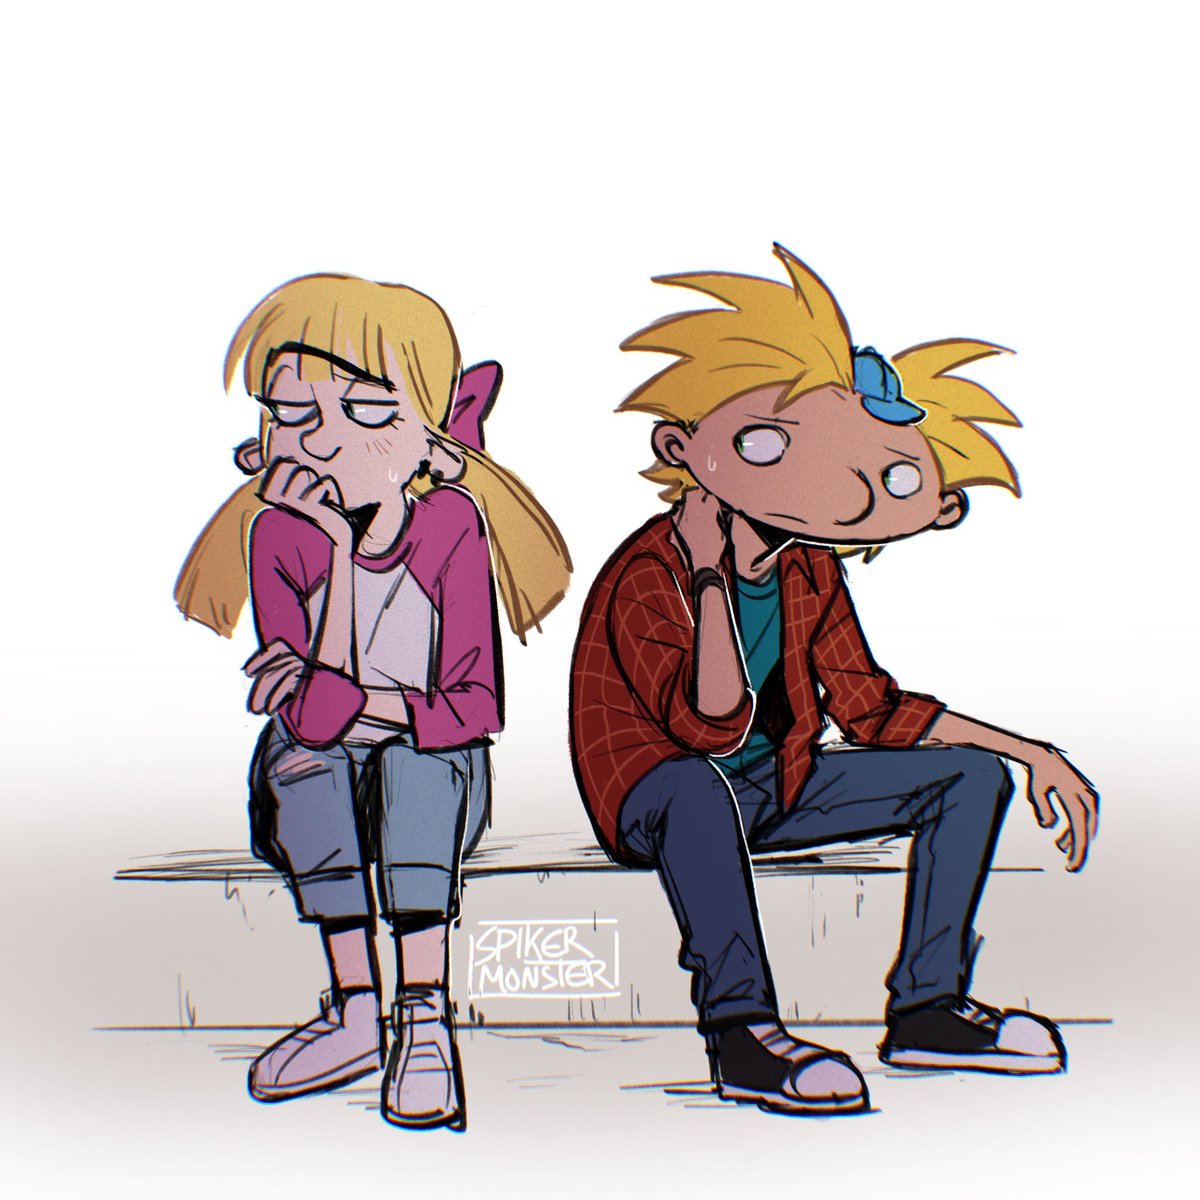 「#heyarnoldhow it started                」|Spike R. Monster 💀のイラスト